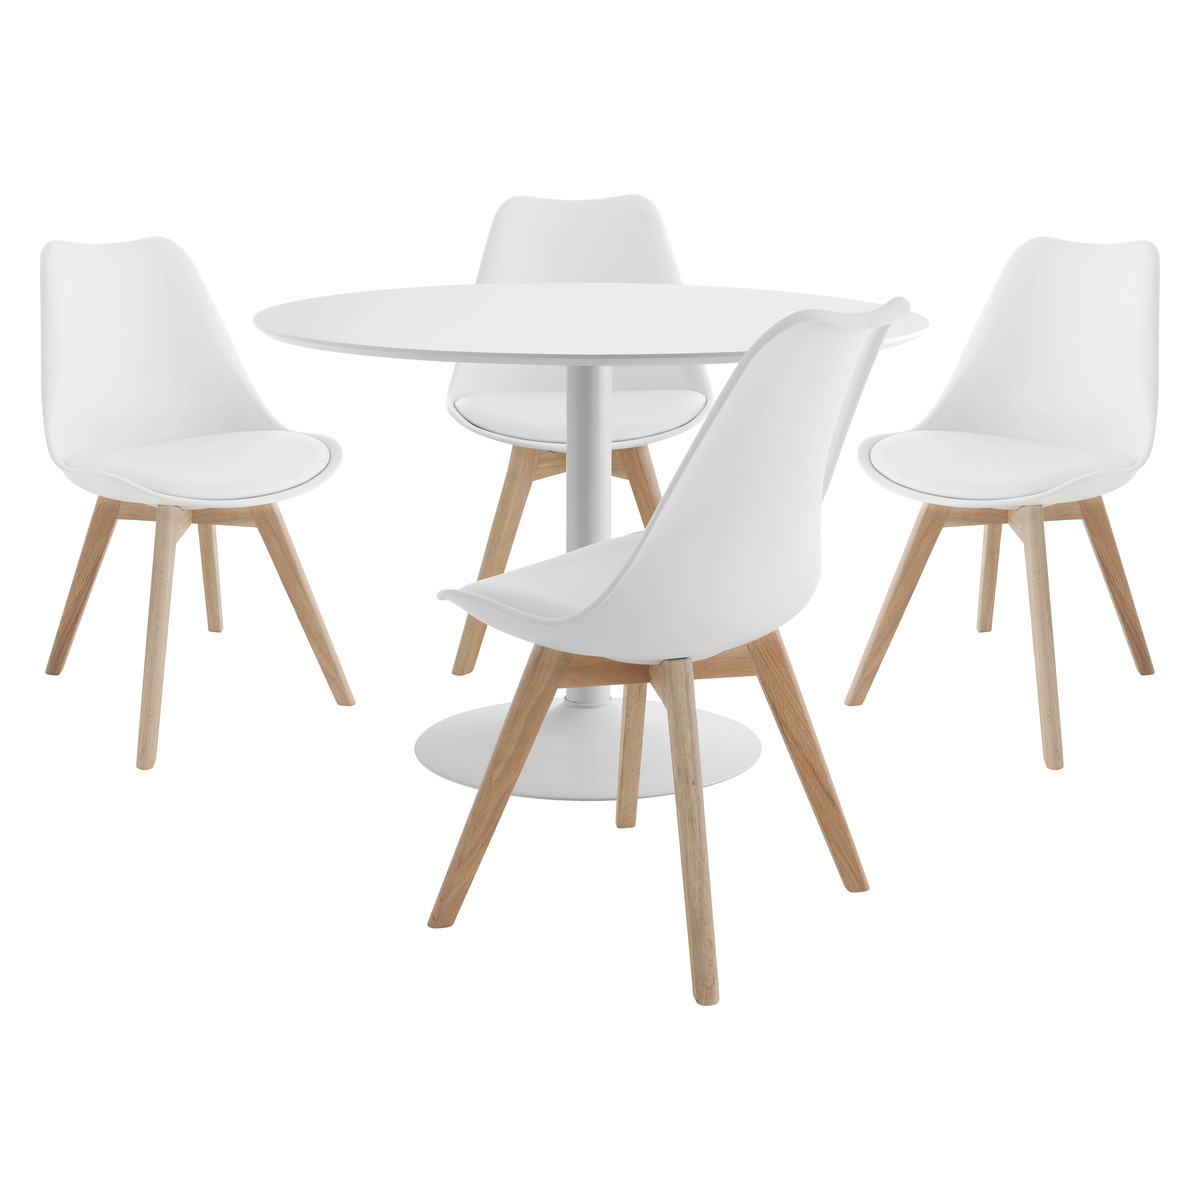 Habitat Lance 4 Seater Dining Set With Lance White Table And 4